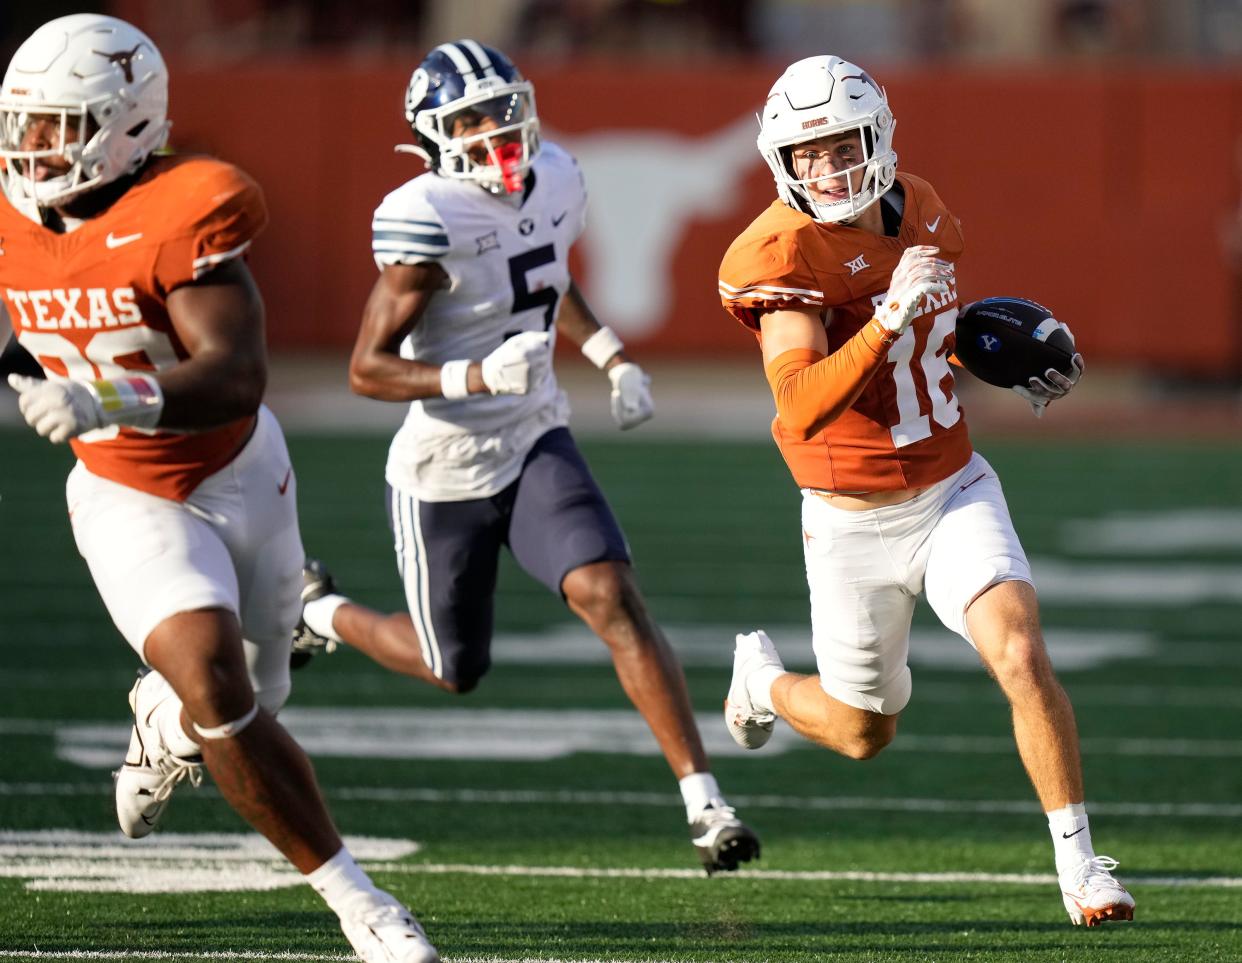 Texas safety Michael Taaffe returns an interception 45 yards in the fourth quarter against BYU. His second pick in as many games set up a late Longhorns touchdown.